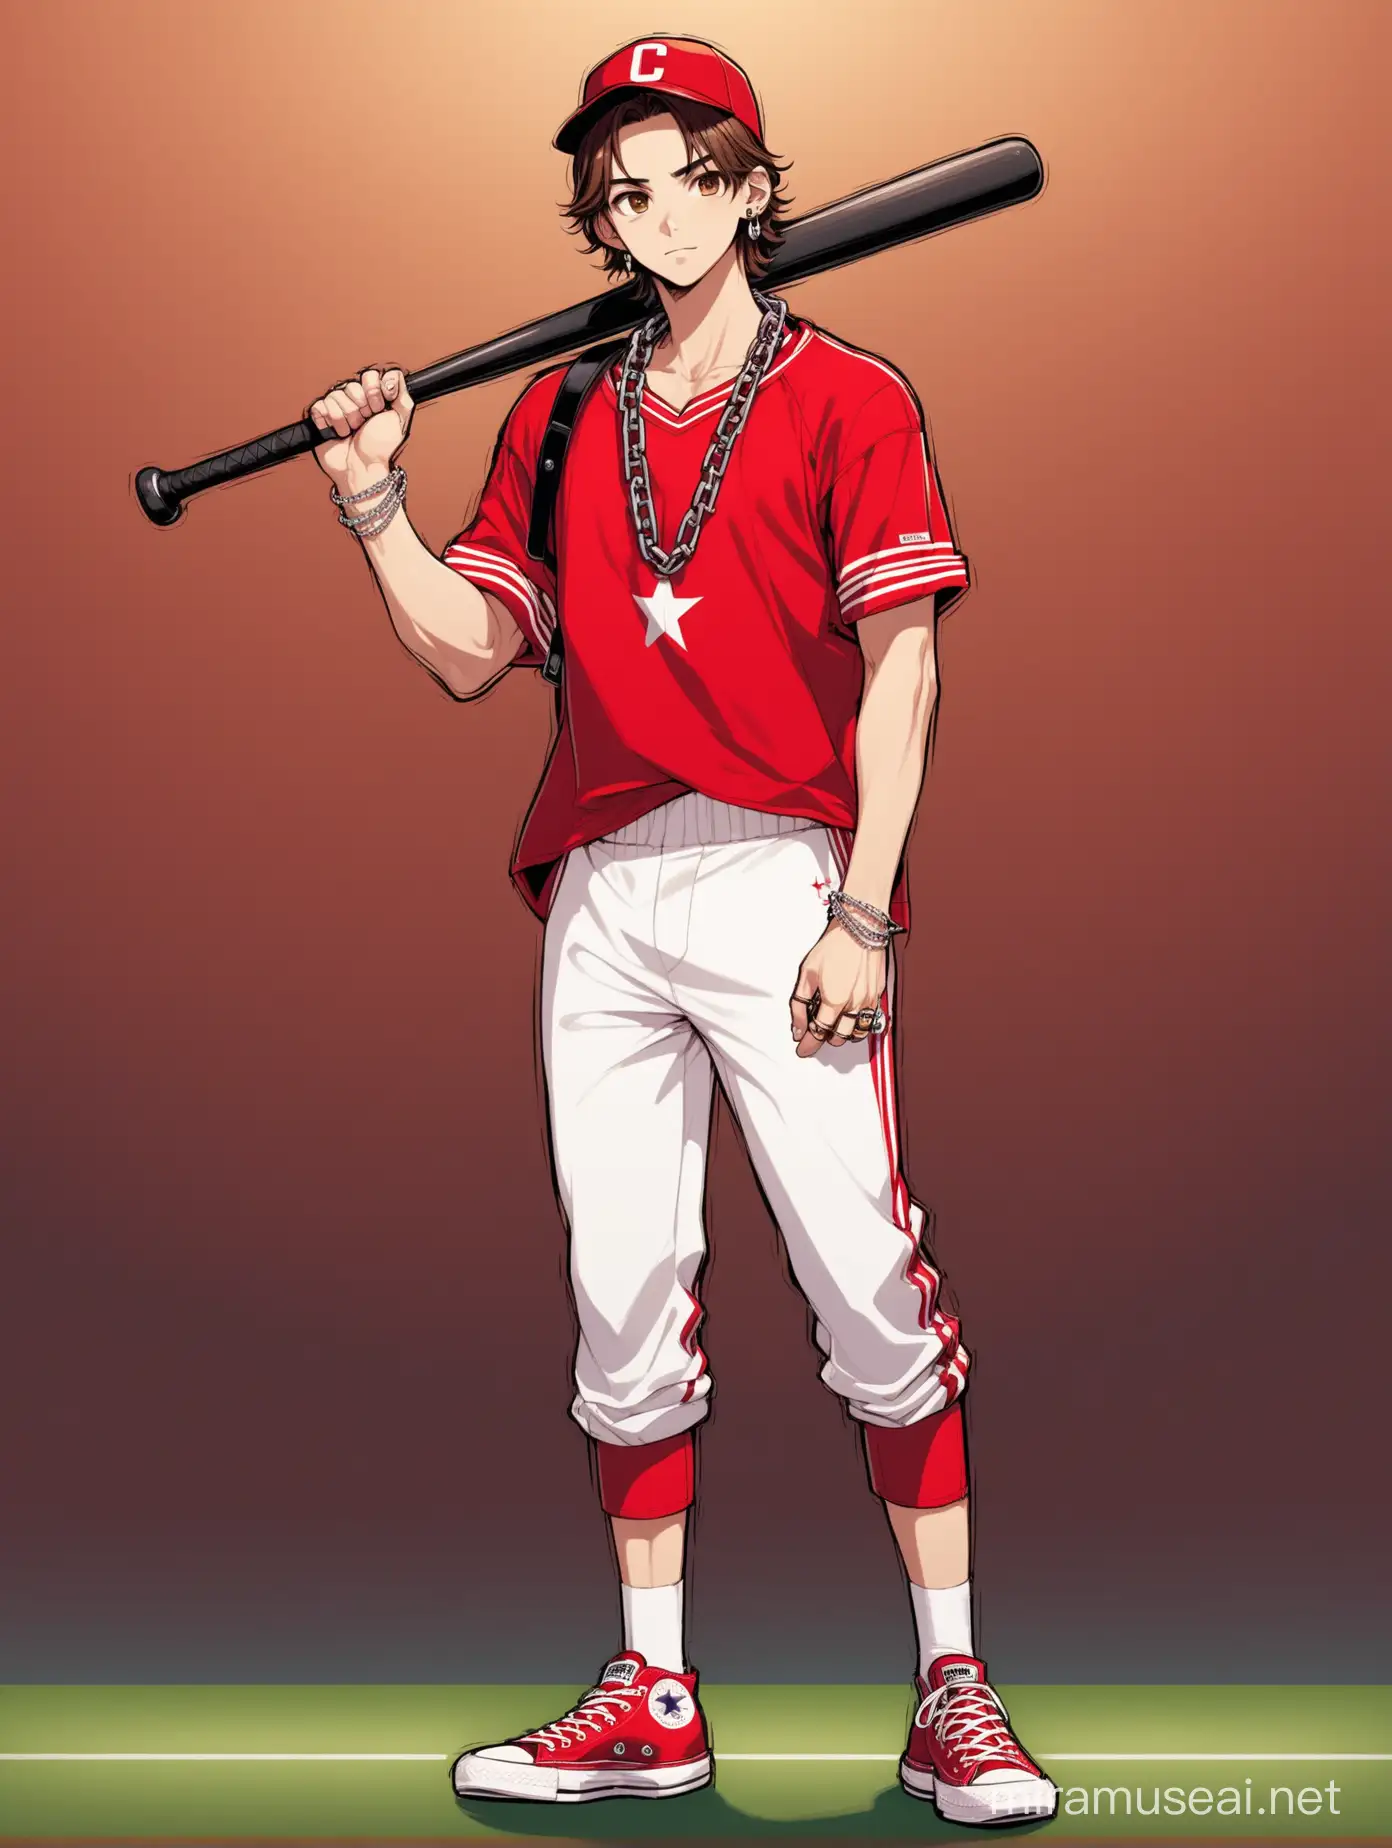 A handsome young man with brown hair and big brown eyes, wearing red sports clothes and white sneakers, wearing earrings in his ears, rings on his fingers and a chain around his neck, wearing long red Converse shoes, and carrying a baseball bat on his shoulder.